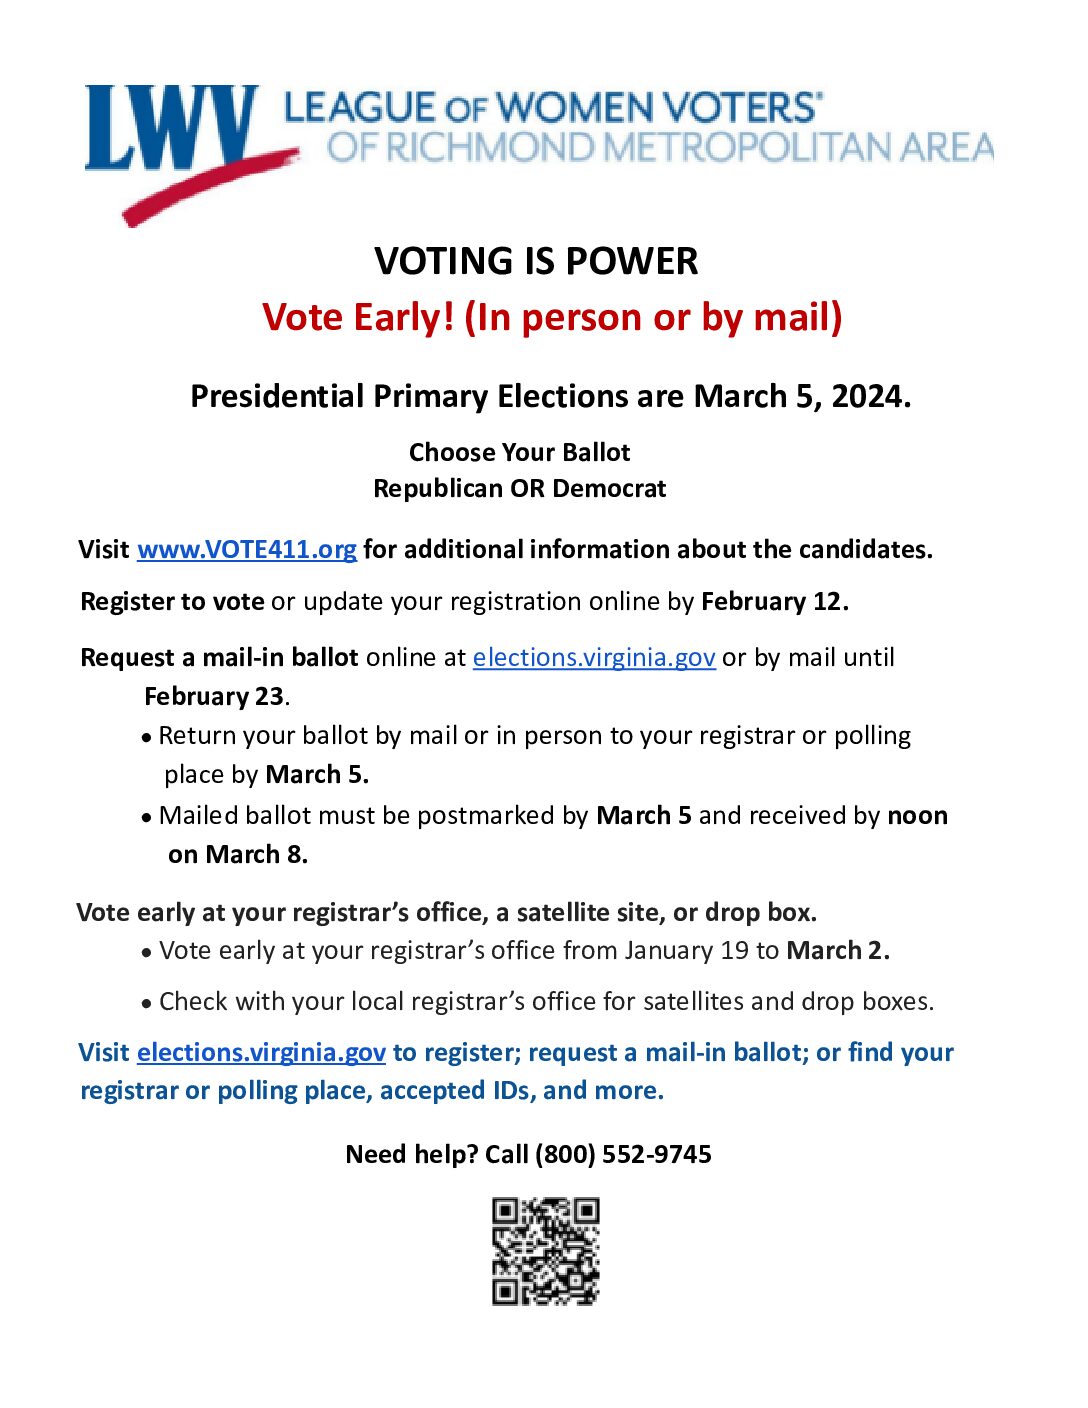 Fact Sheet for 2024 Presidential Primary – Vote Early